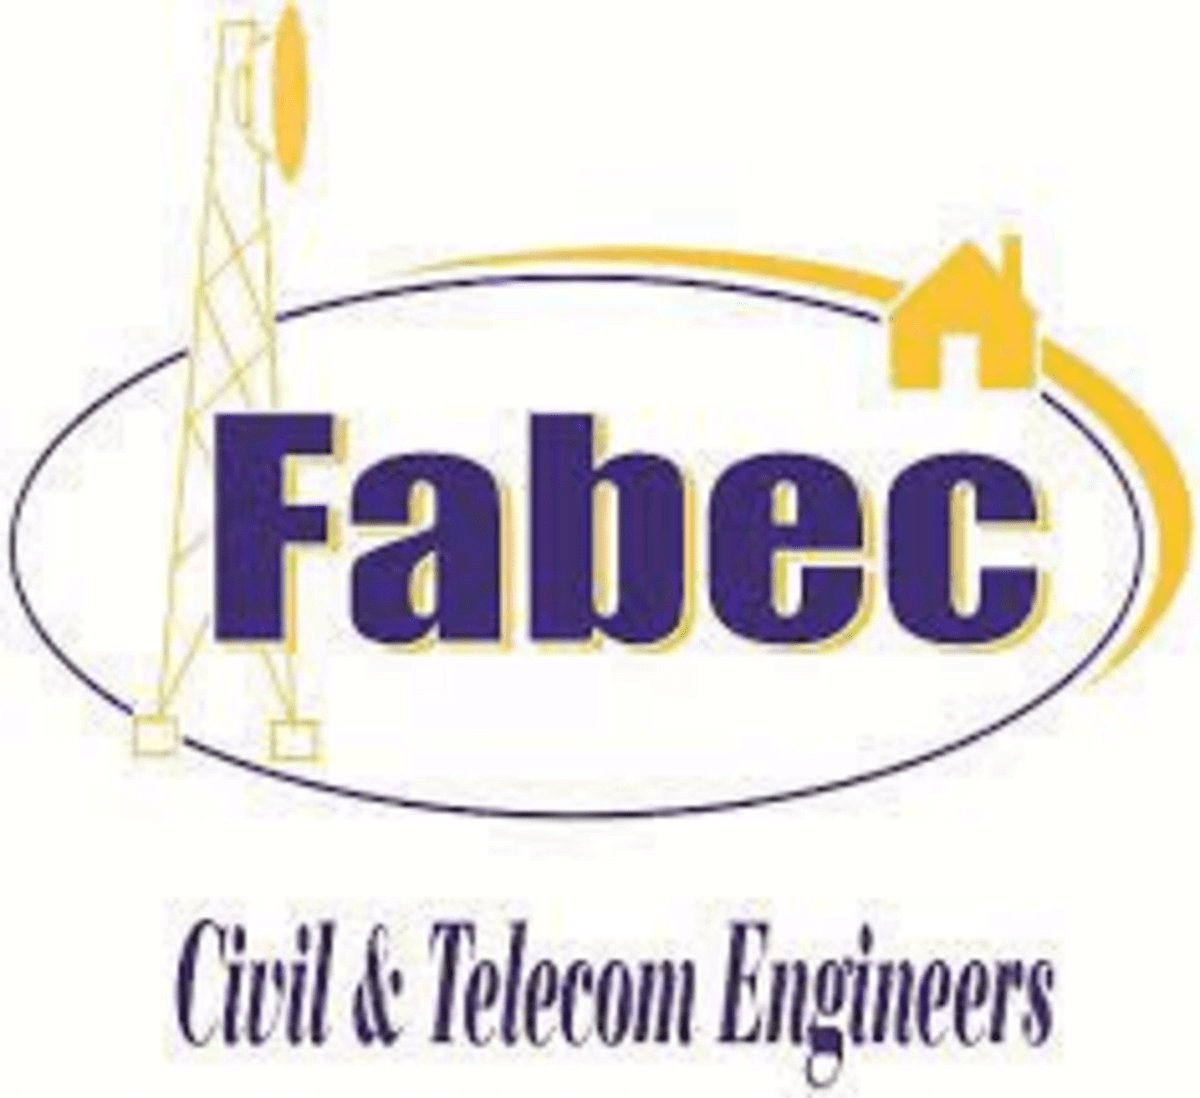 Latest Job Opportunity at Fabec Investment Ltd 2022, Fabec Investment Ltd Jobs, Fabec Investment Ltd Vacancies, Fabec Investment Ltd job opportunities, Nafasi za kazi Fabec Investment Ltd